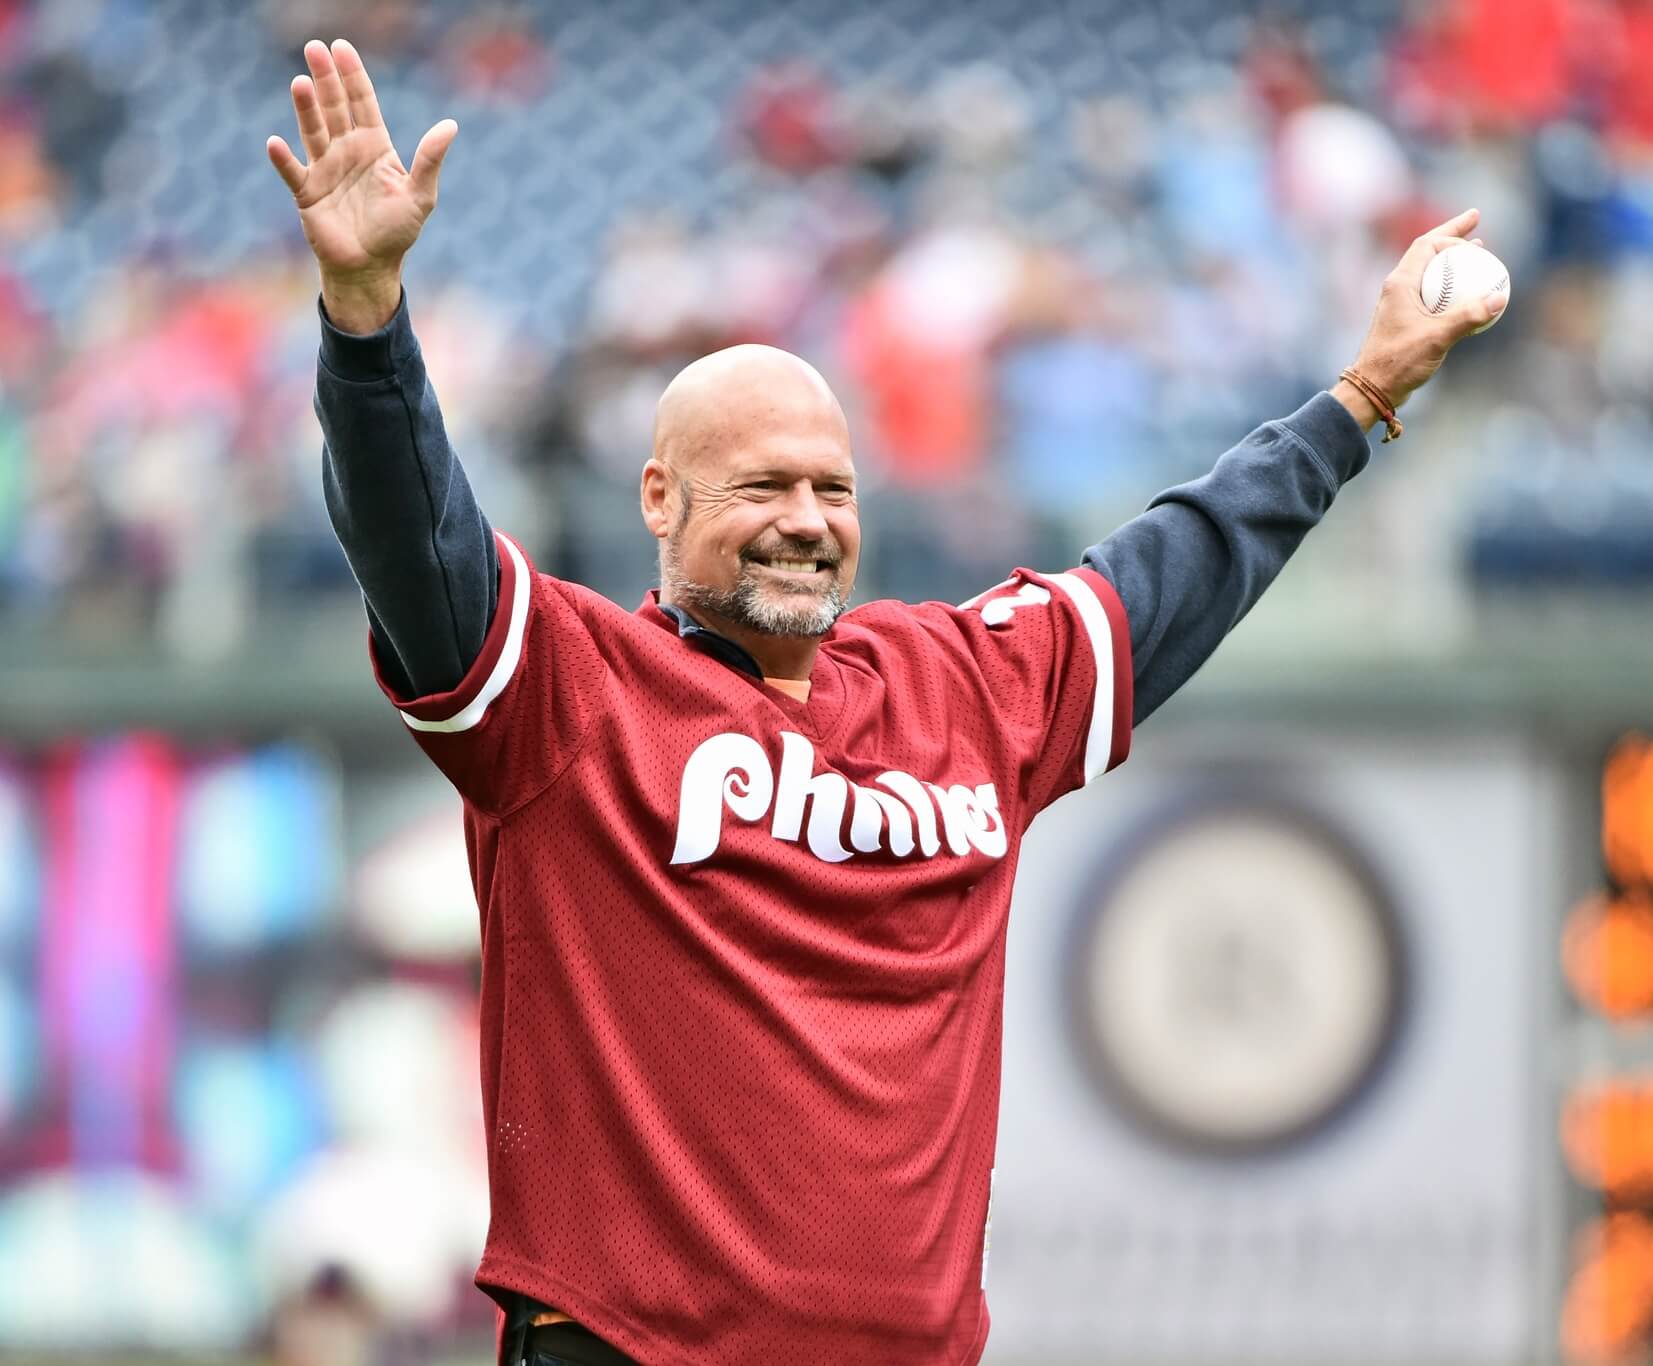 This Heart-Breaking Darren Daulton Story Says Everything About